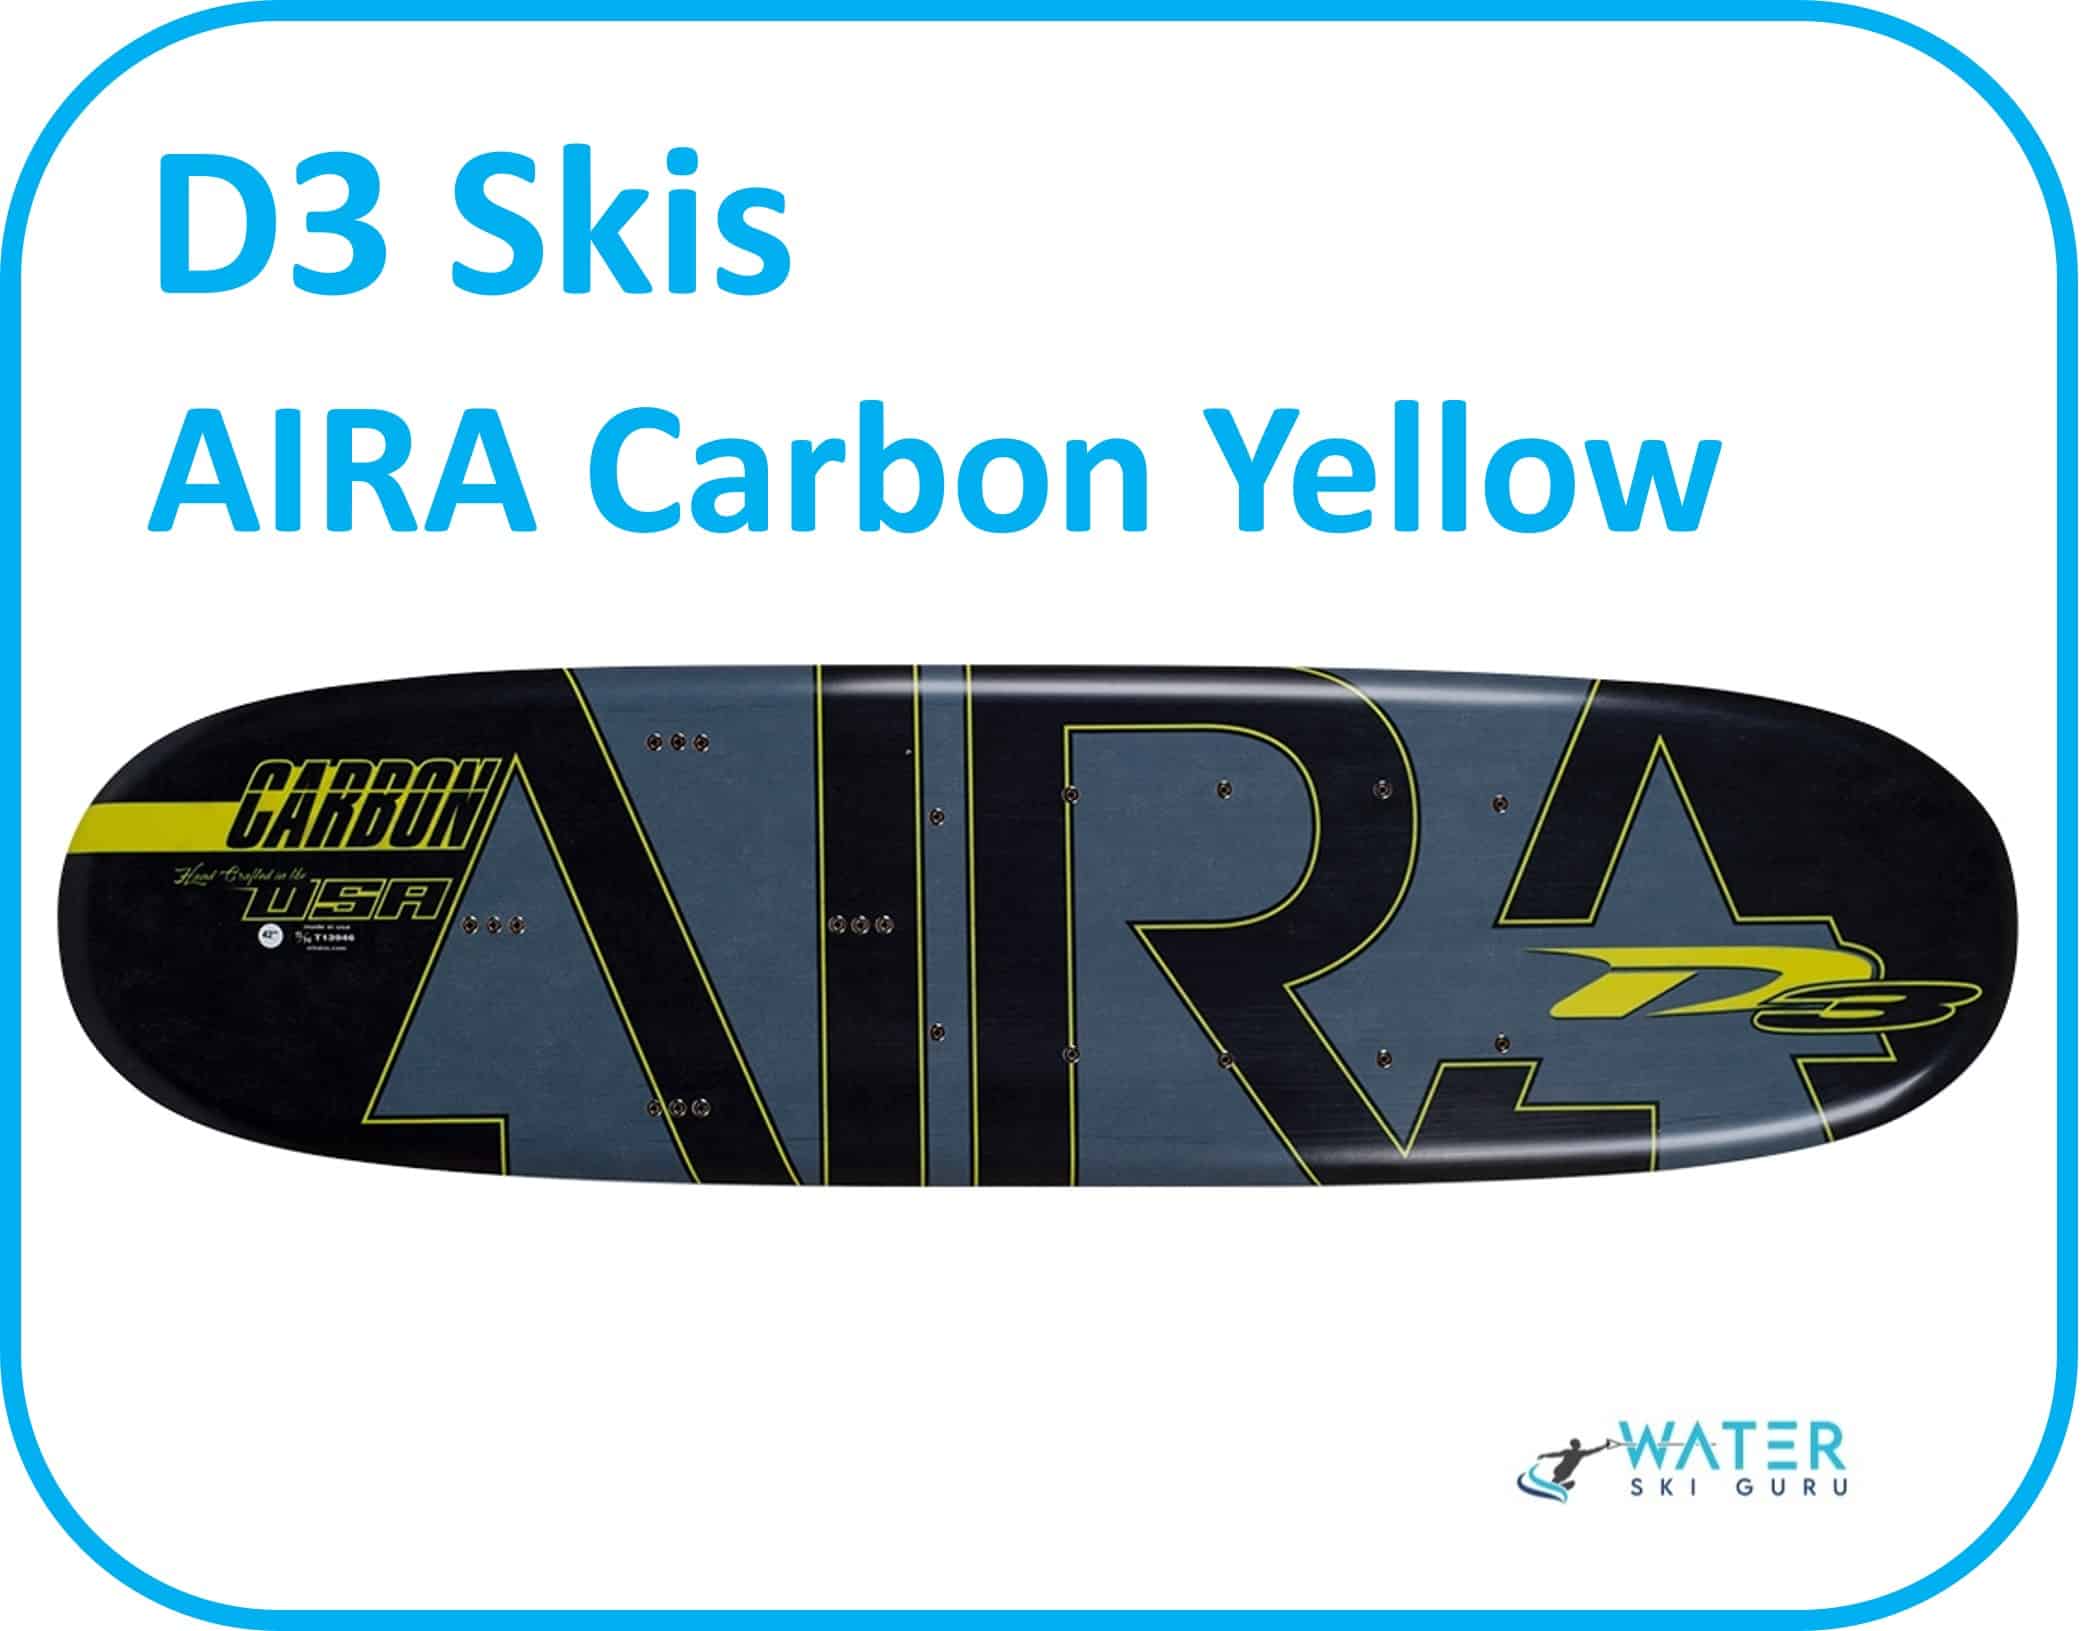 D3 Skis AIRA Carbon Yellow